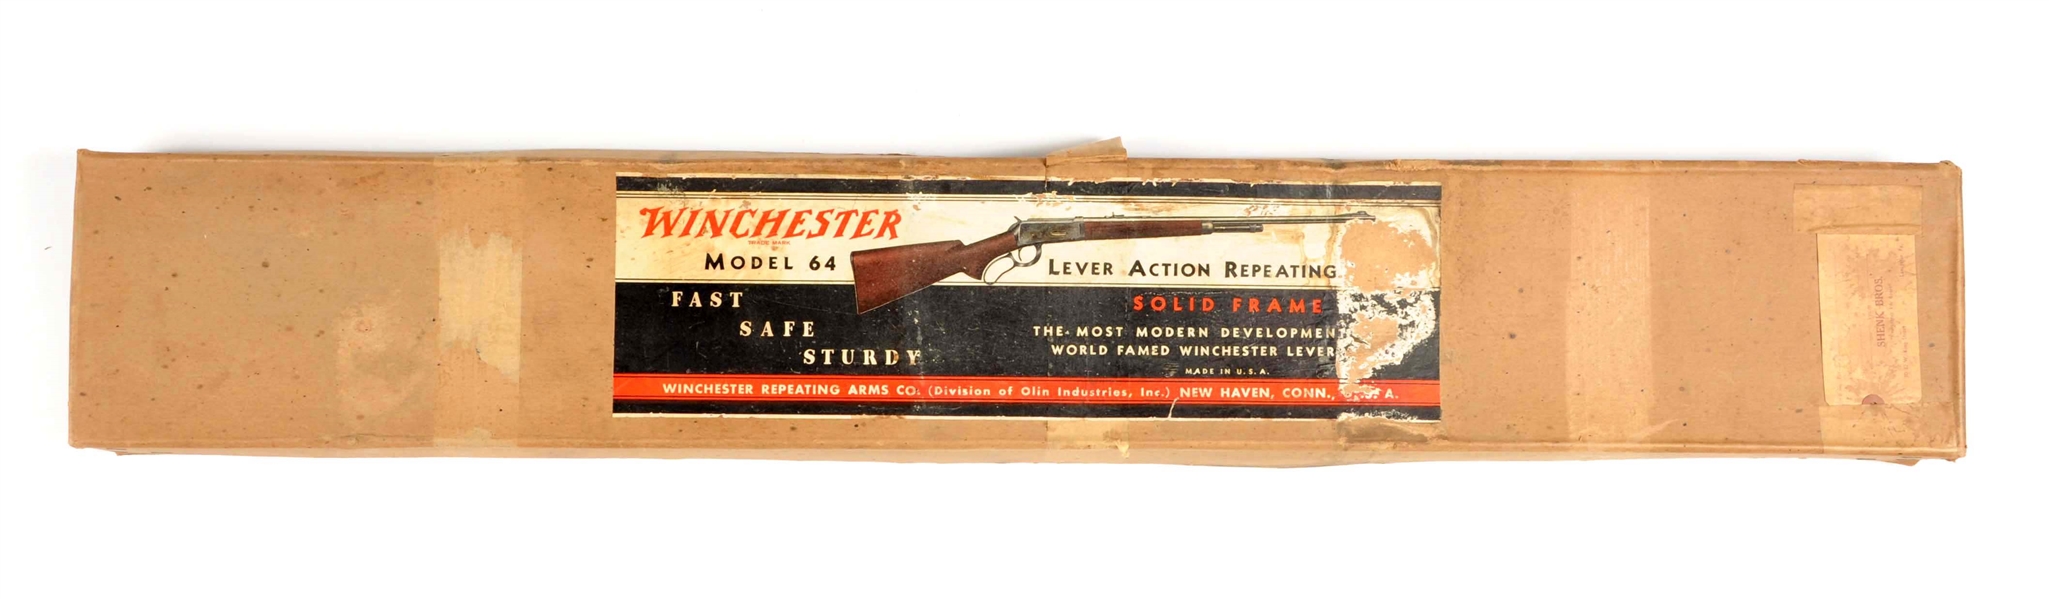 EXTREMELY RARE WINCHESTER MODEL 64 LEVER ACTION RIFLE PICTURE BOX 1949 (BOX ONLY).